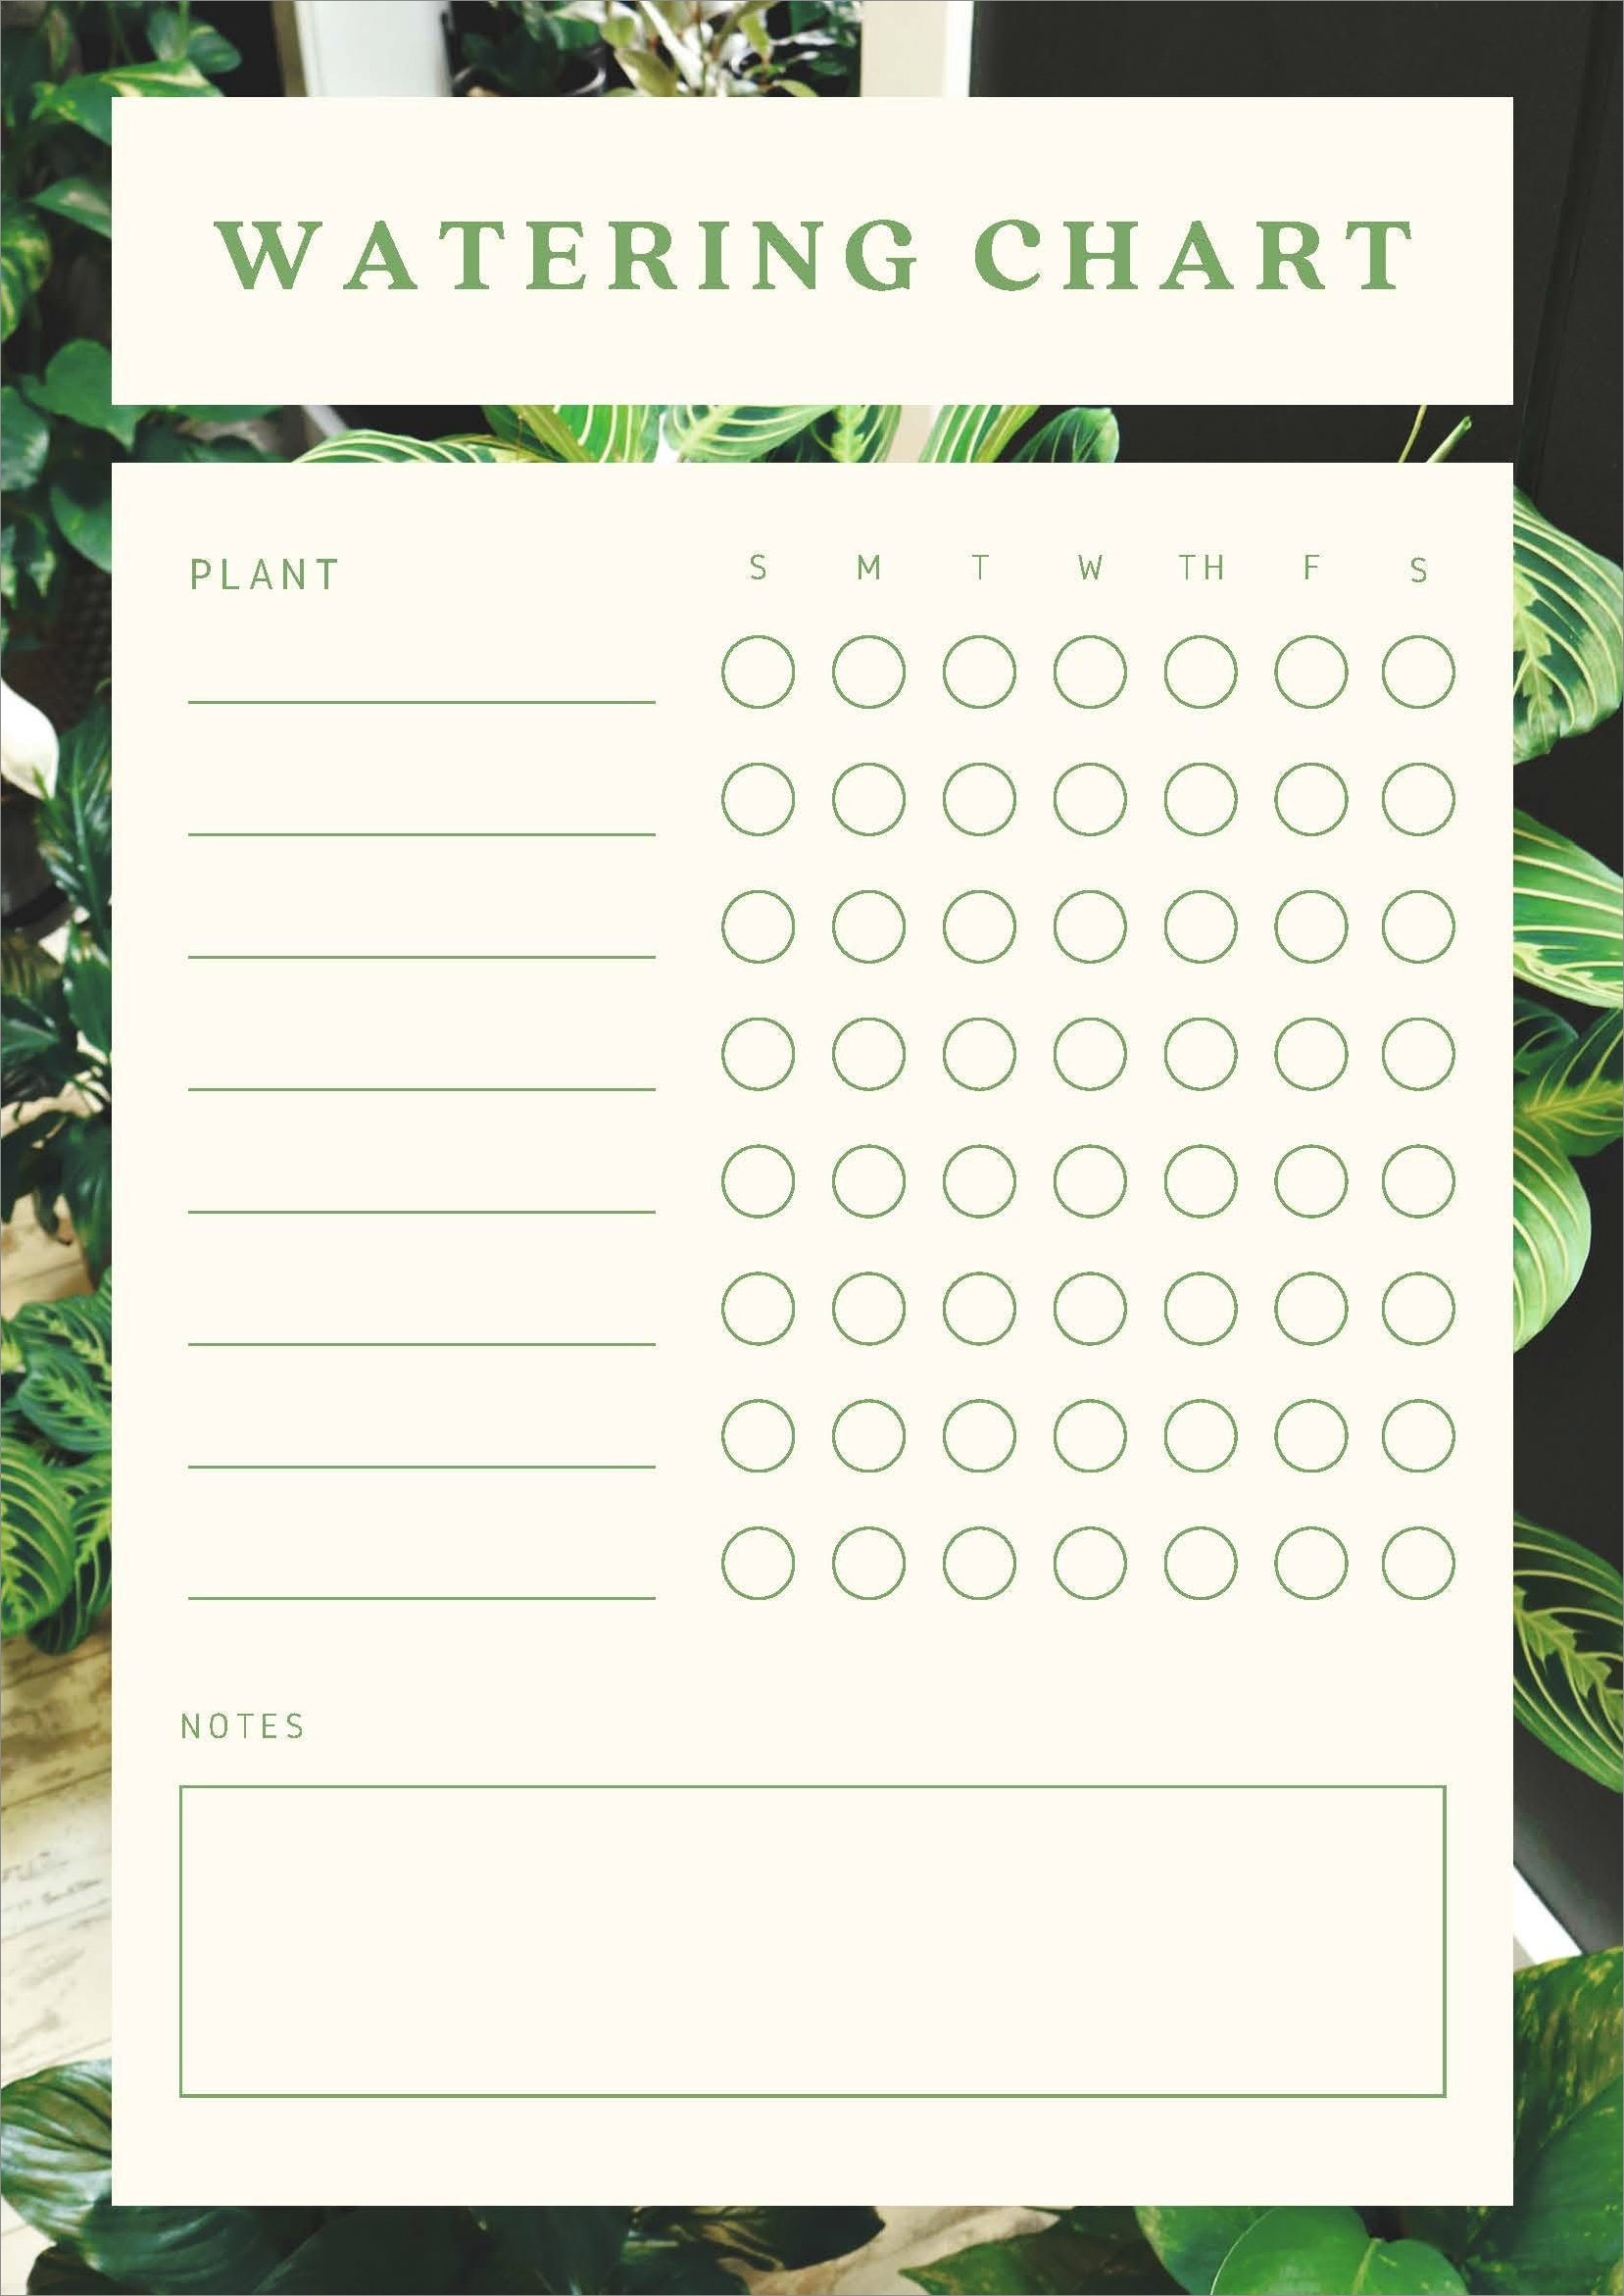 example of plant watering schedule template